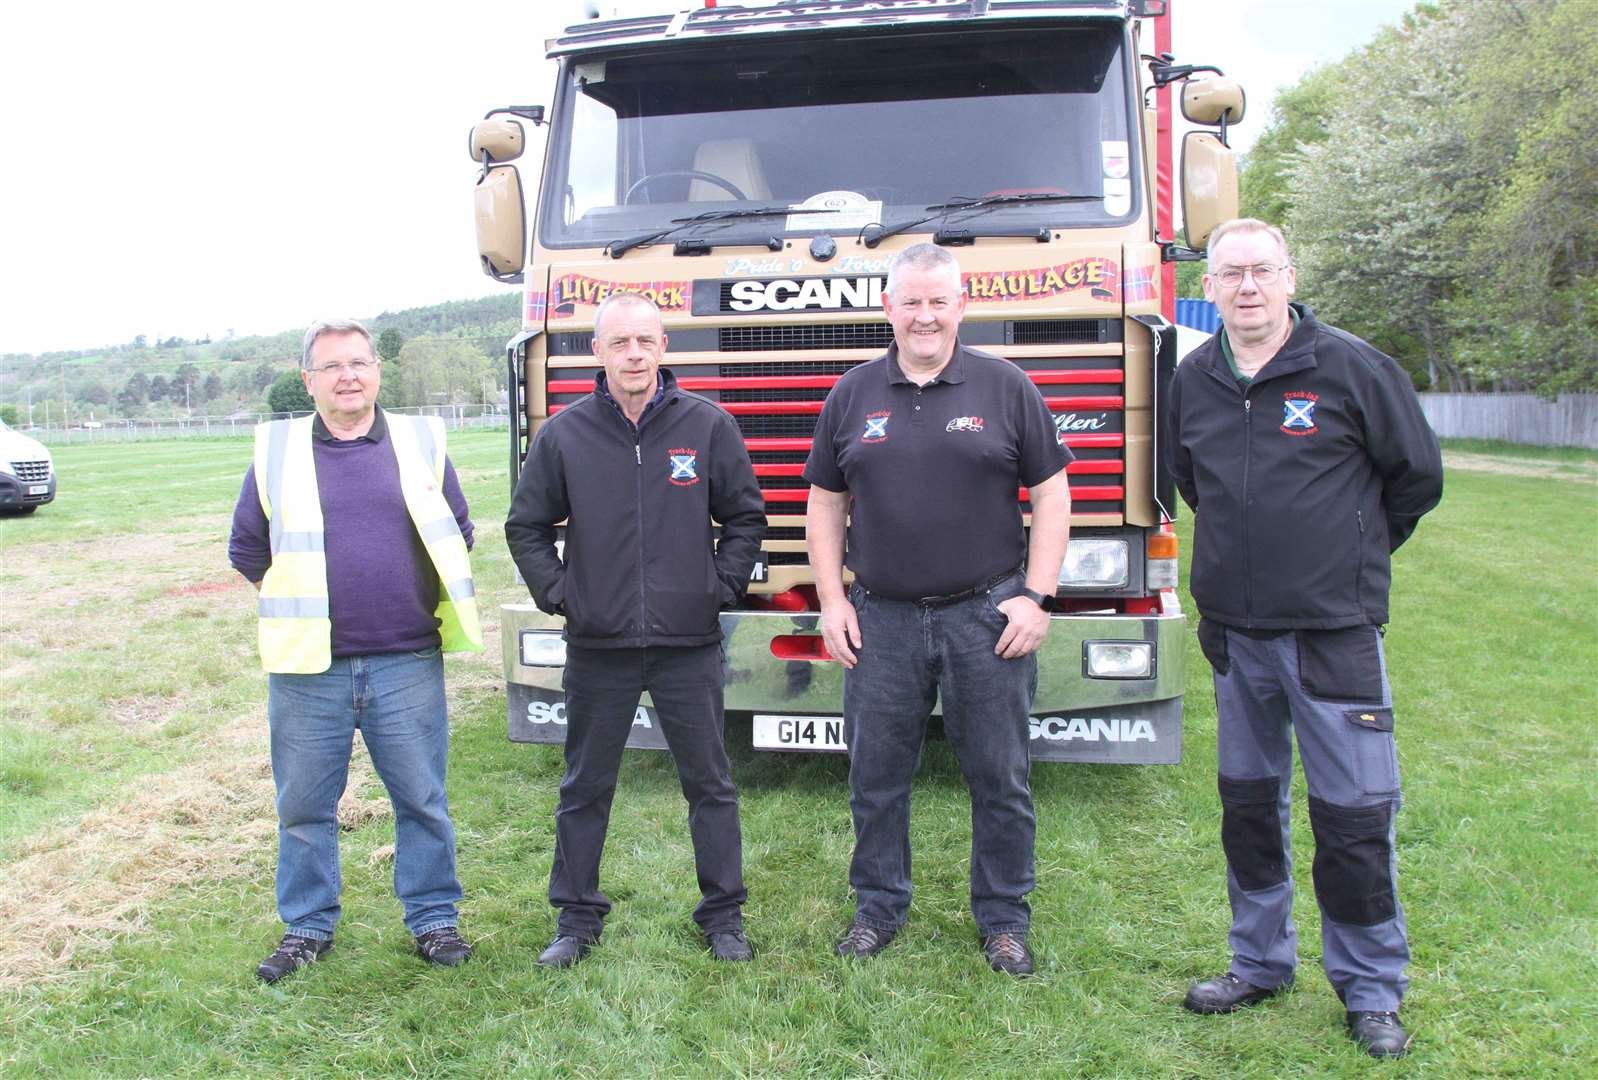 READY TO ROLL: Michael Shand, Martin Grant, John Mackintosh and Raymond McWilliam preparing the show ground earlier this week.